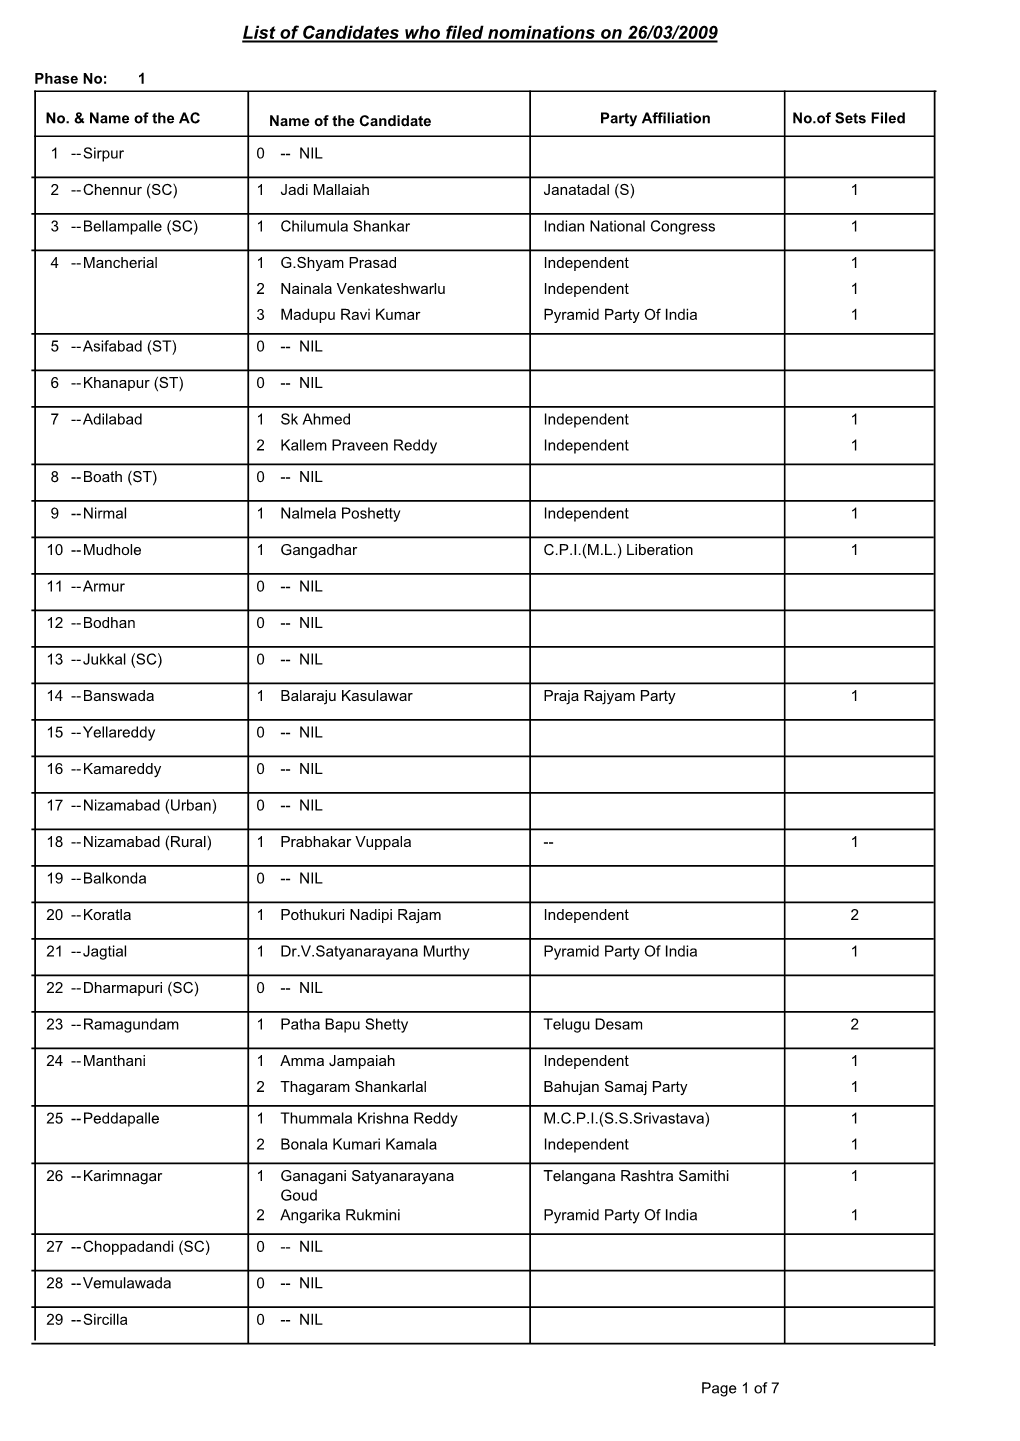 List of Candidates Who Filed Nominations on 26/03/2009